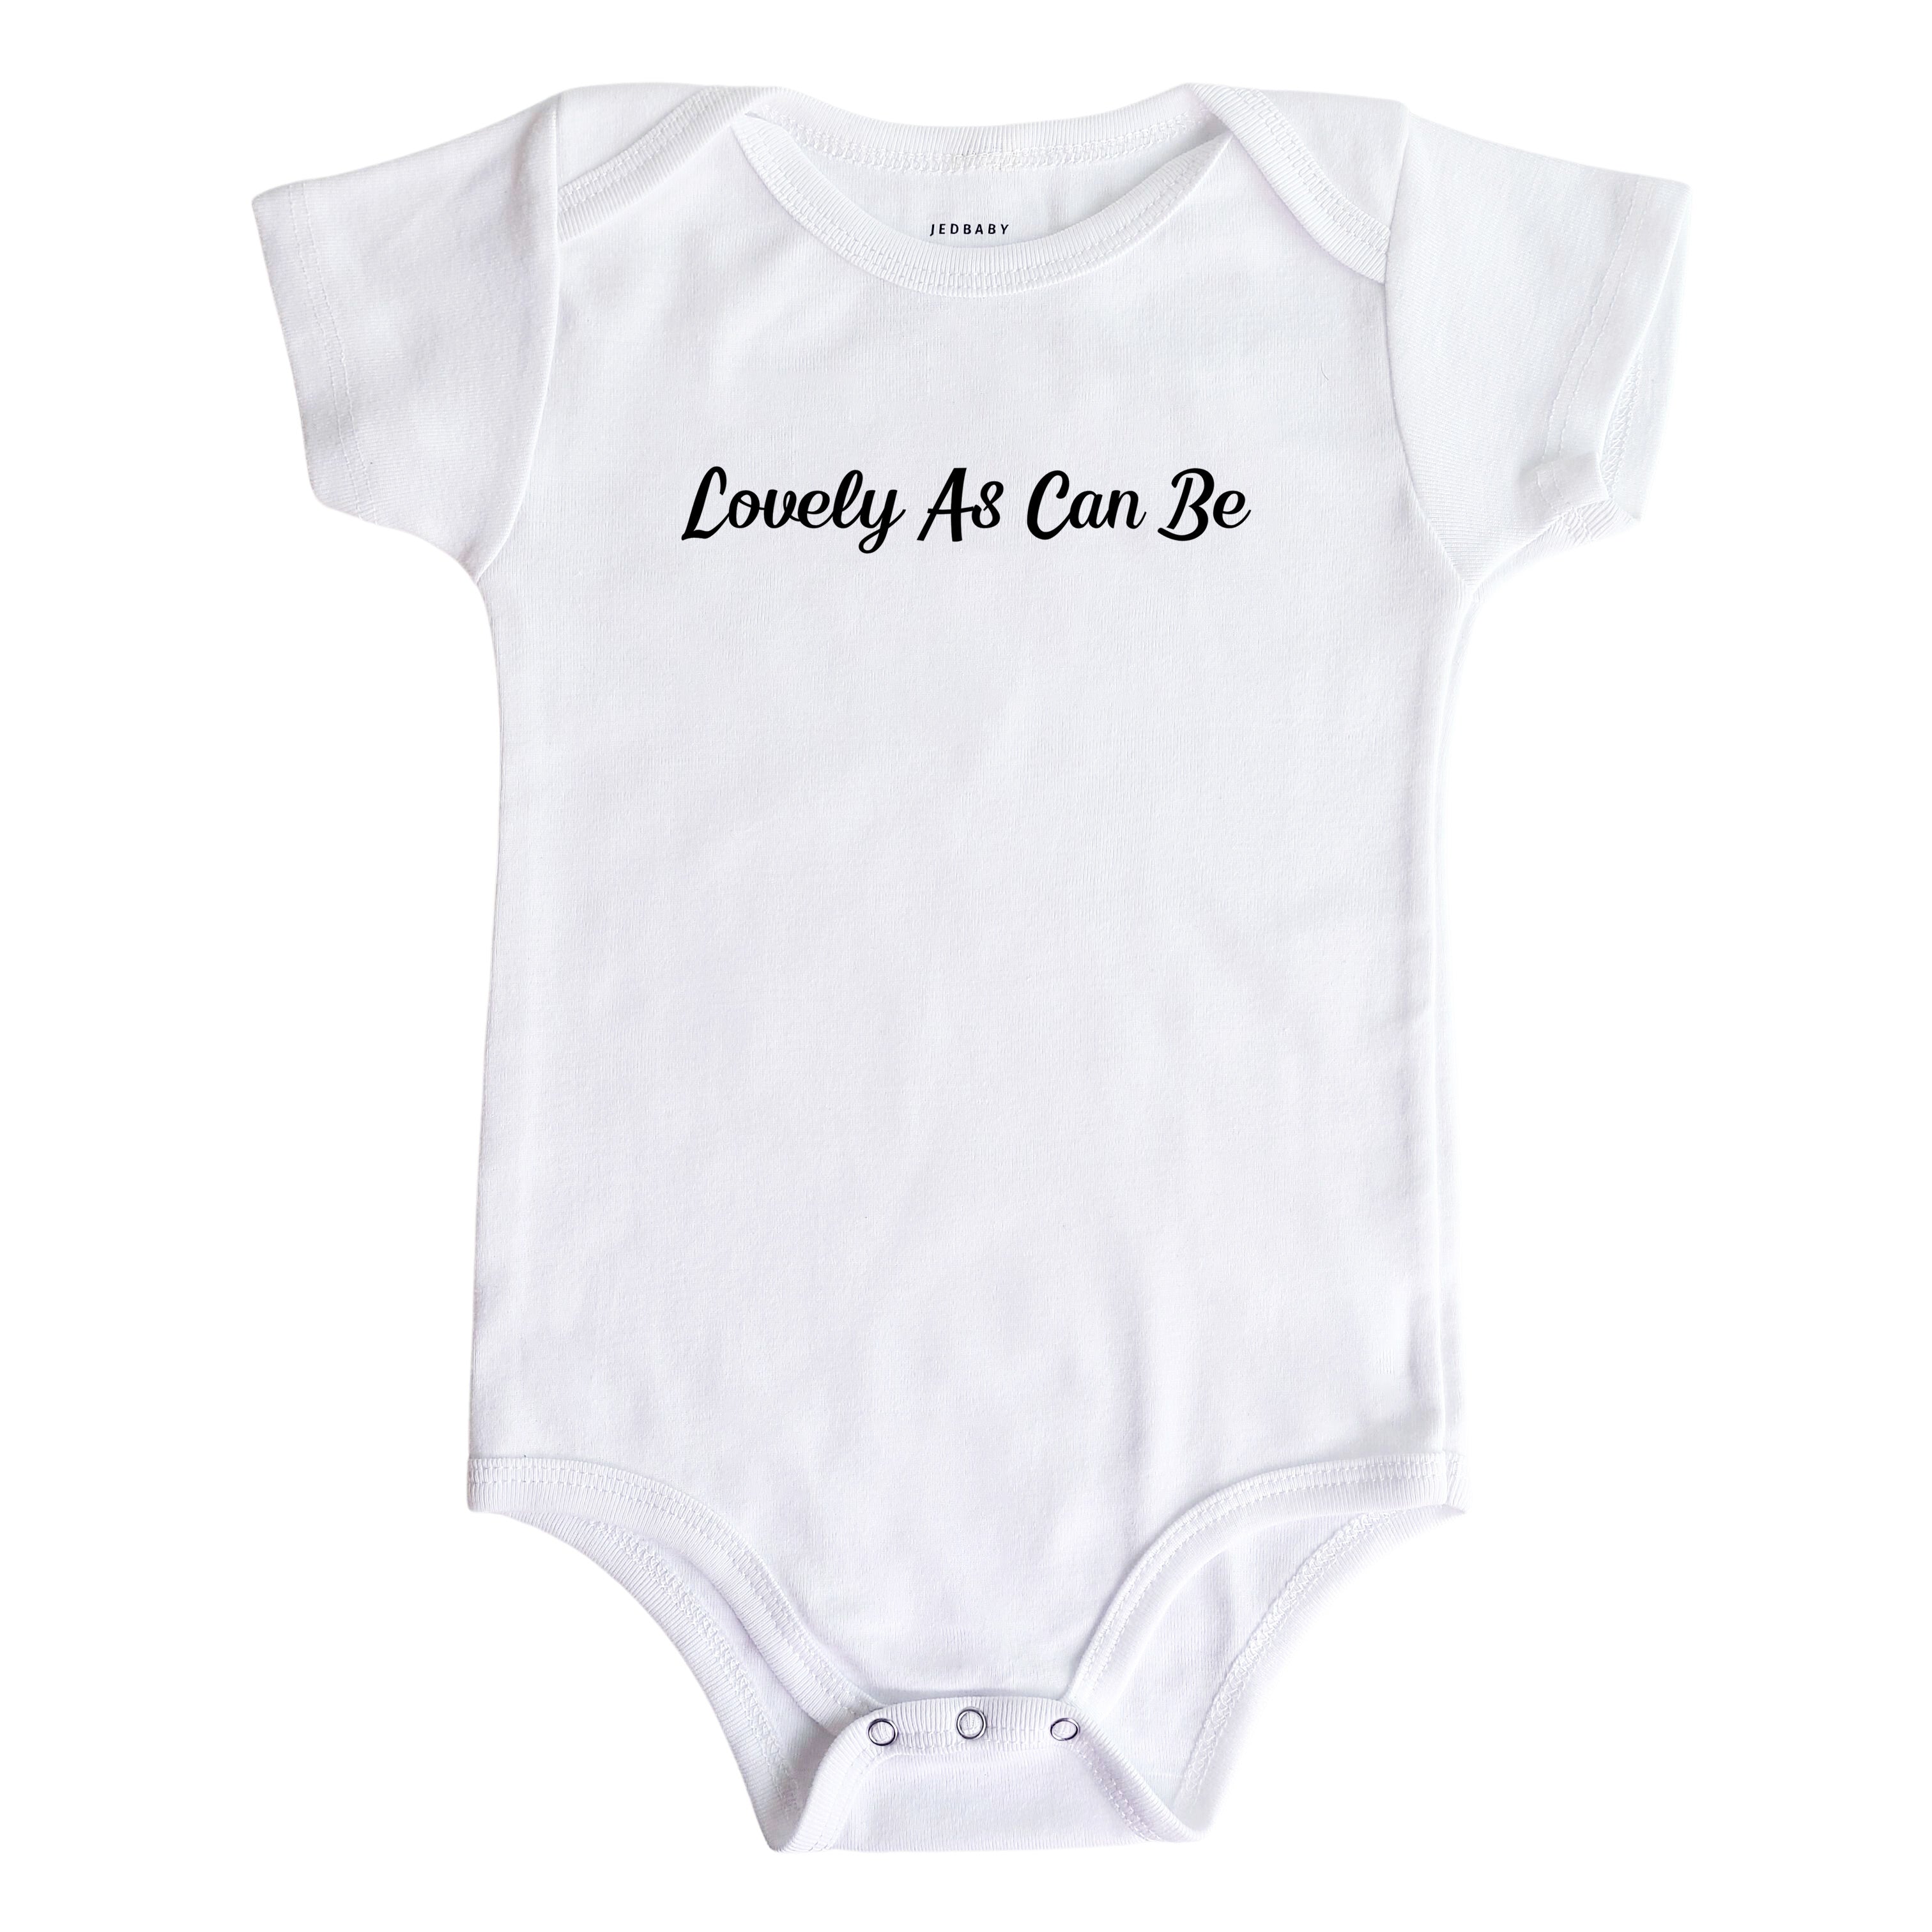 Jedbaby Lovely As Can Be Short Sleeve Baby Onesie Bodysuit